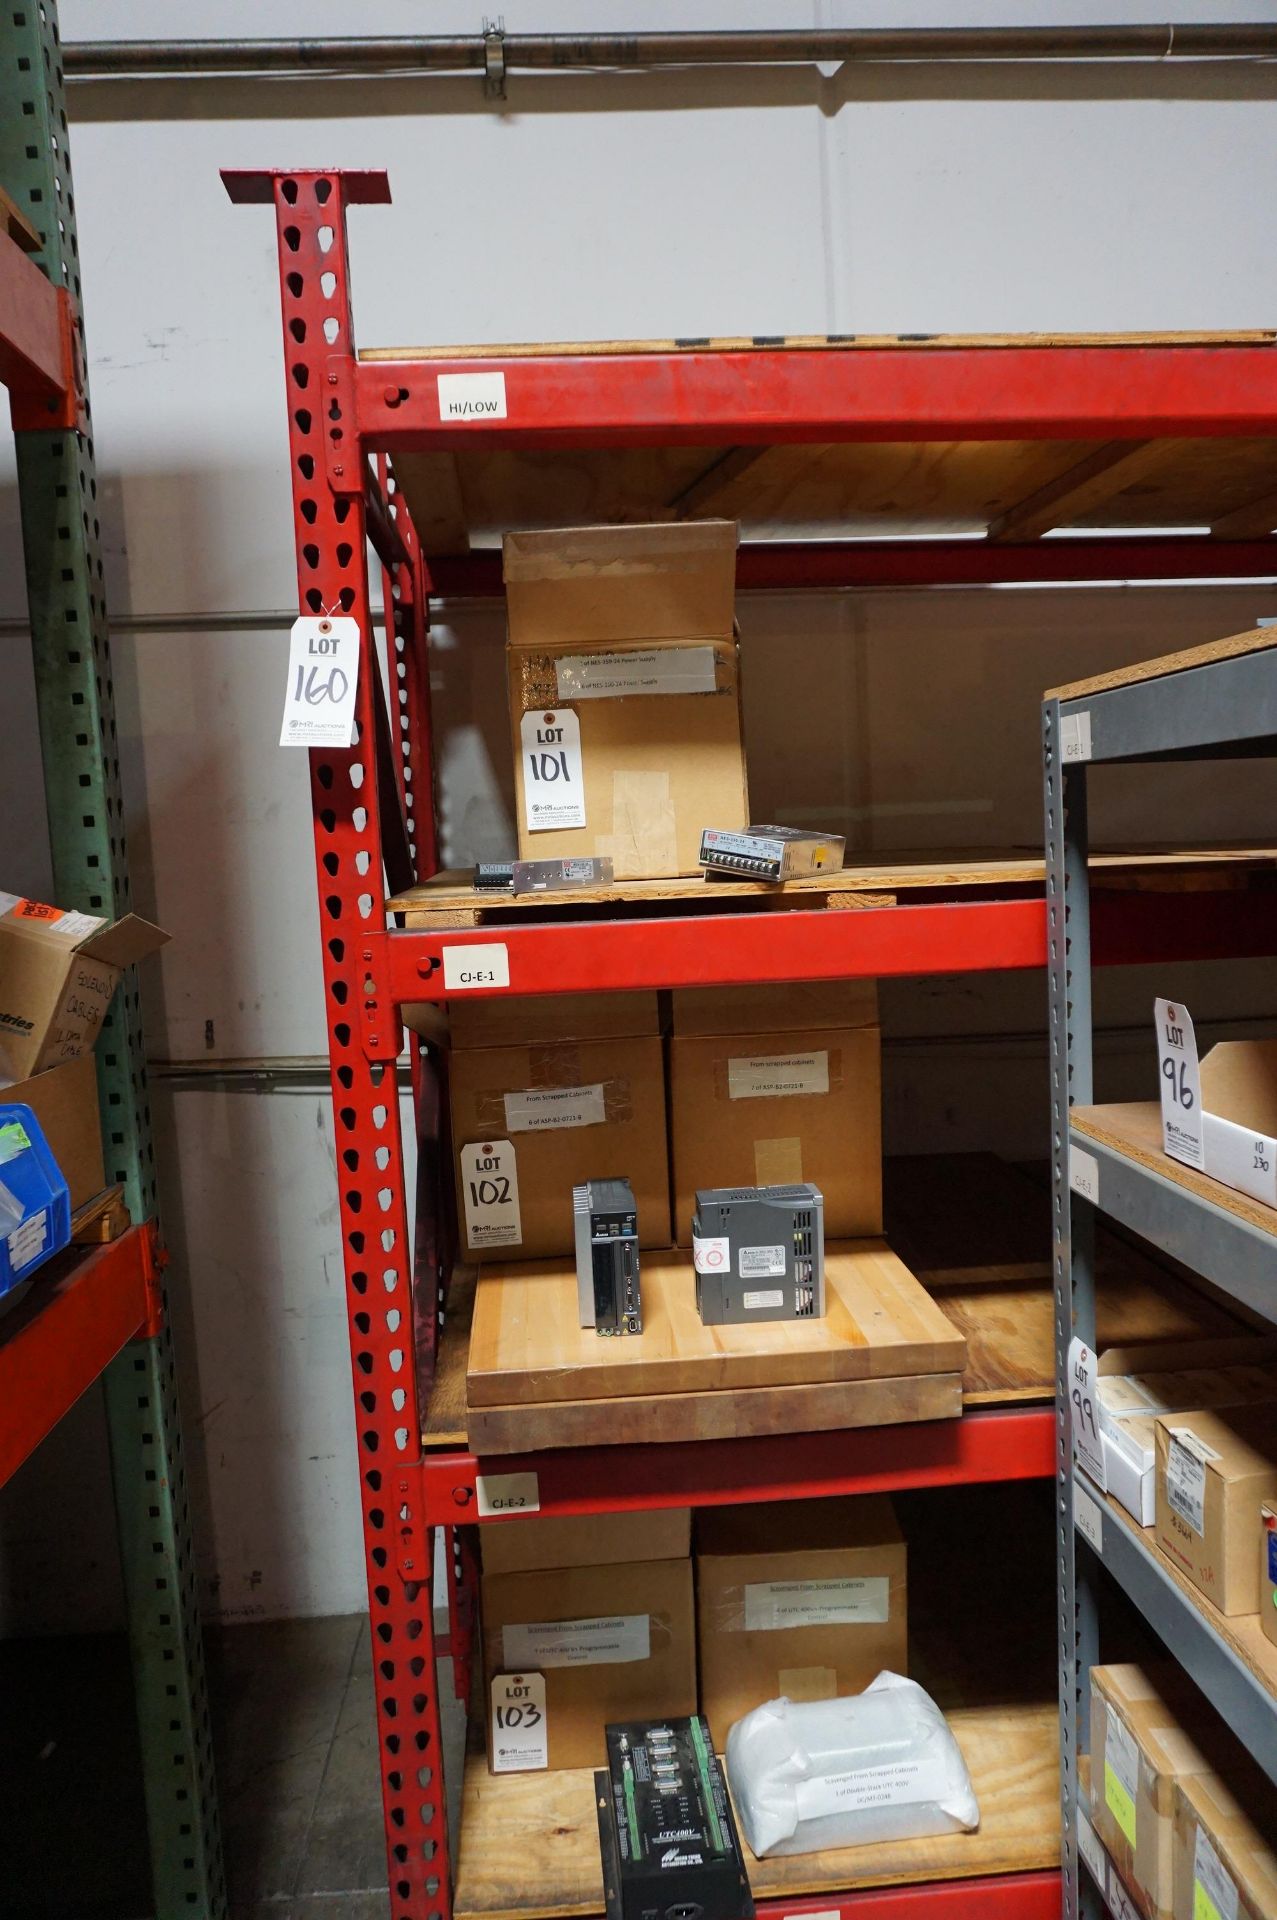 ROW OF INVENTORY SHELVES AND RED HEAVY DUTY RACK *NO CONTENTS RACKS ONLY* - Image 7 of 7